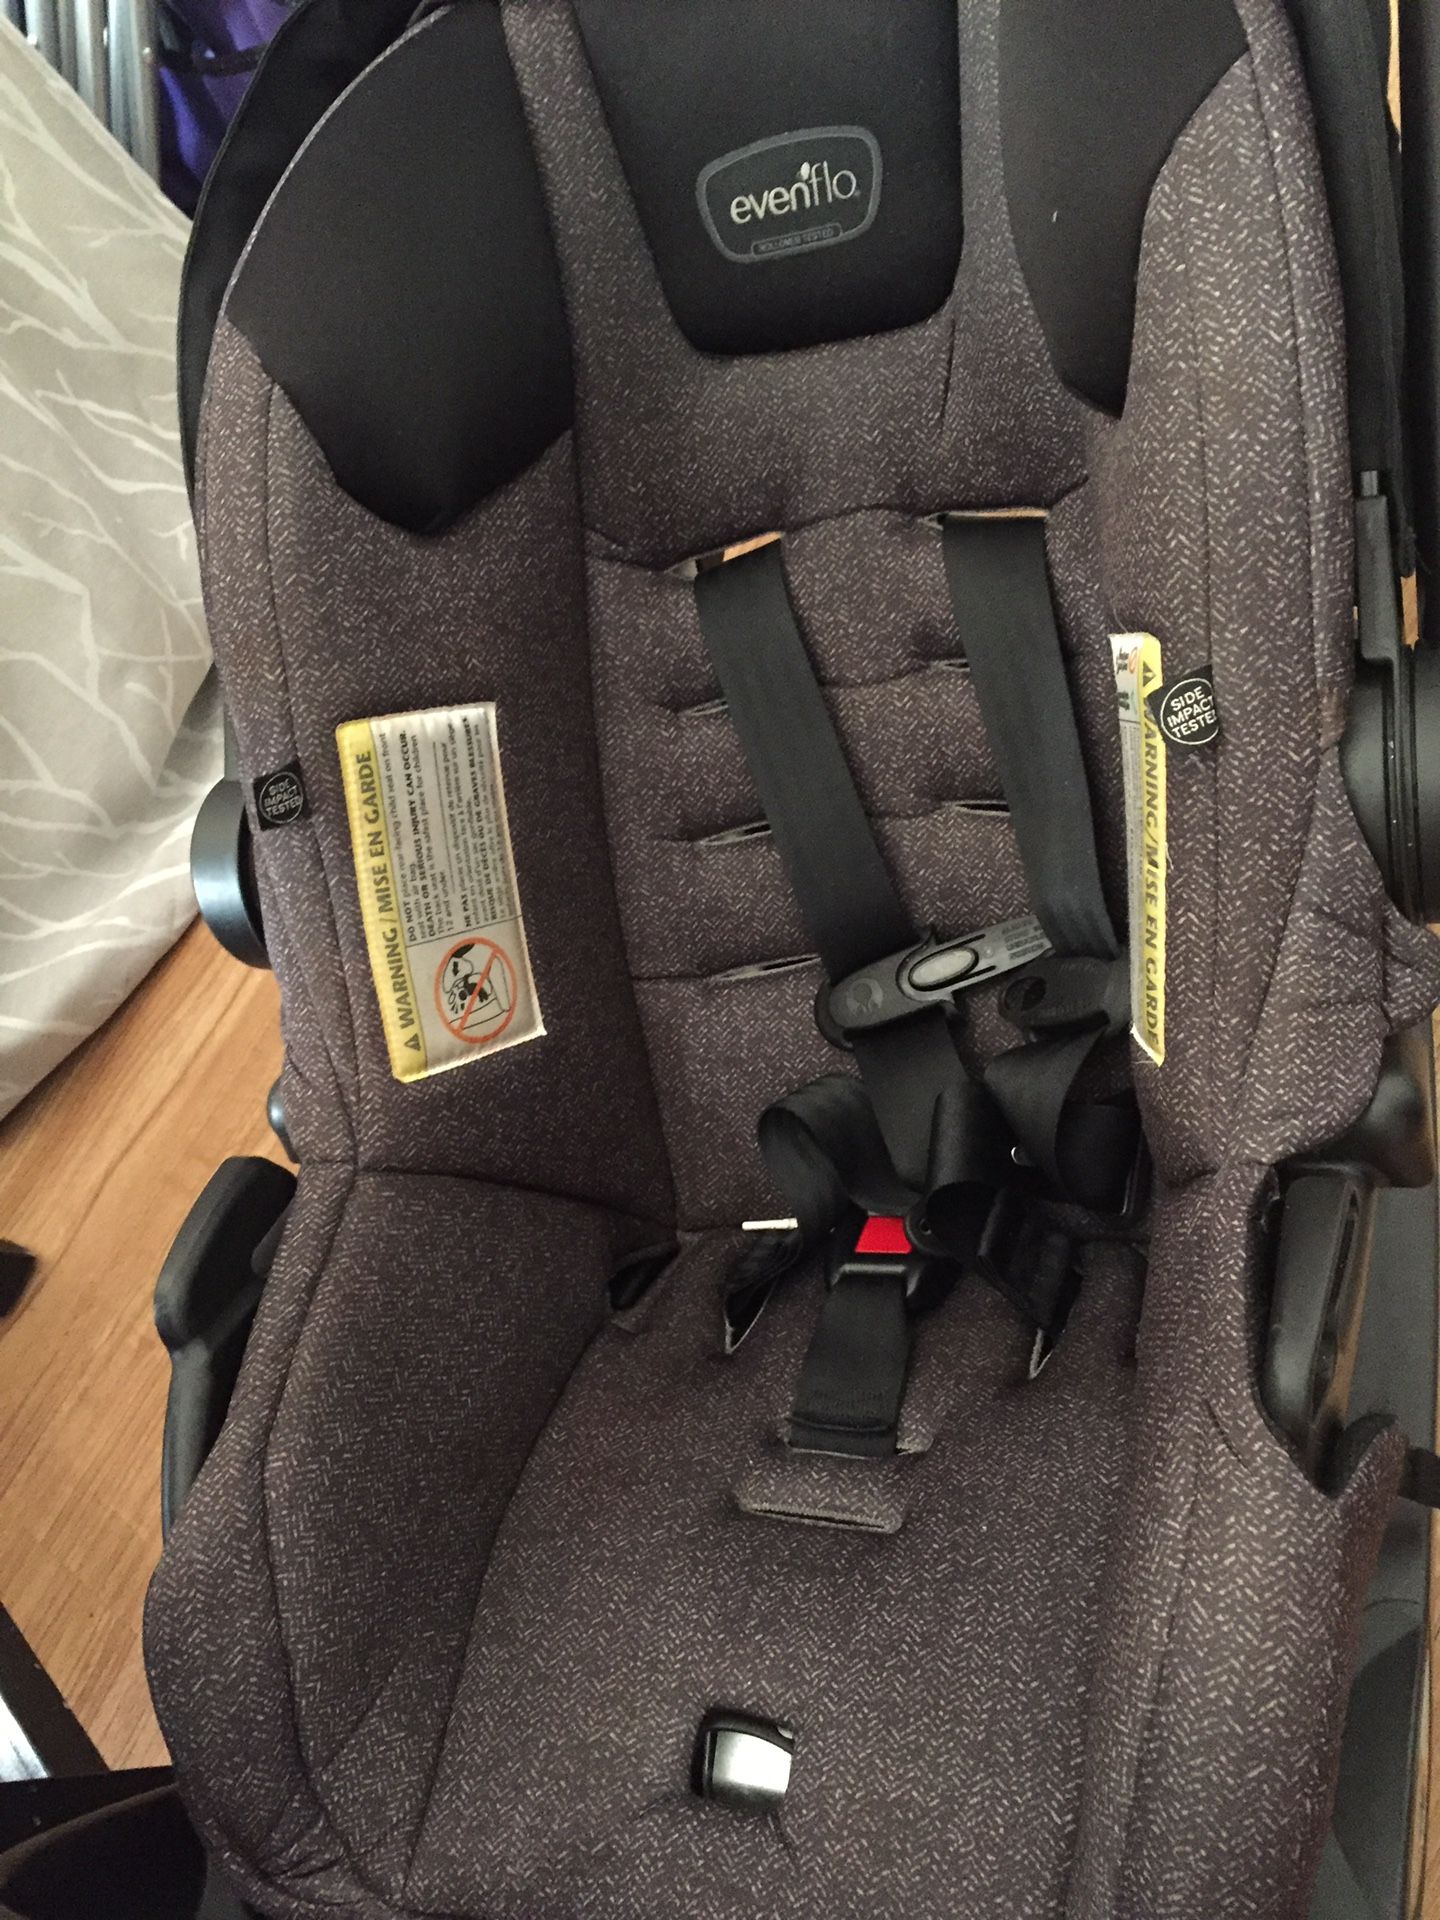 EVENFLO INFANT CAR SEAT WITH BASE